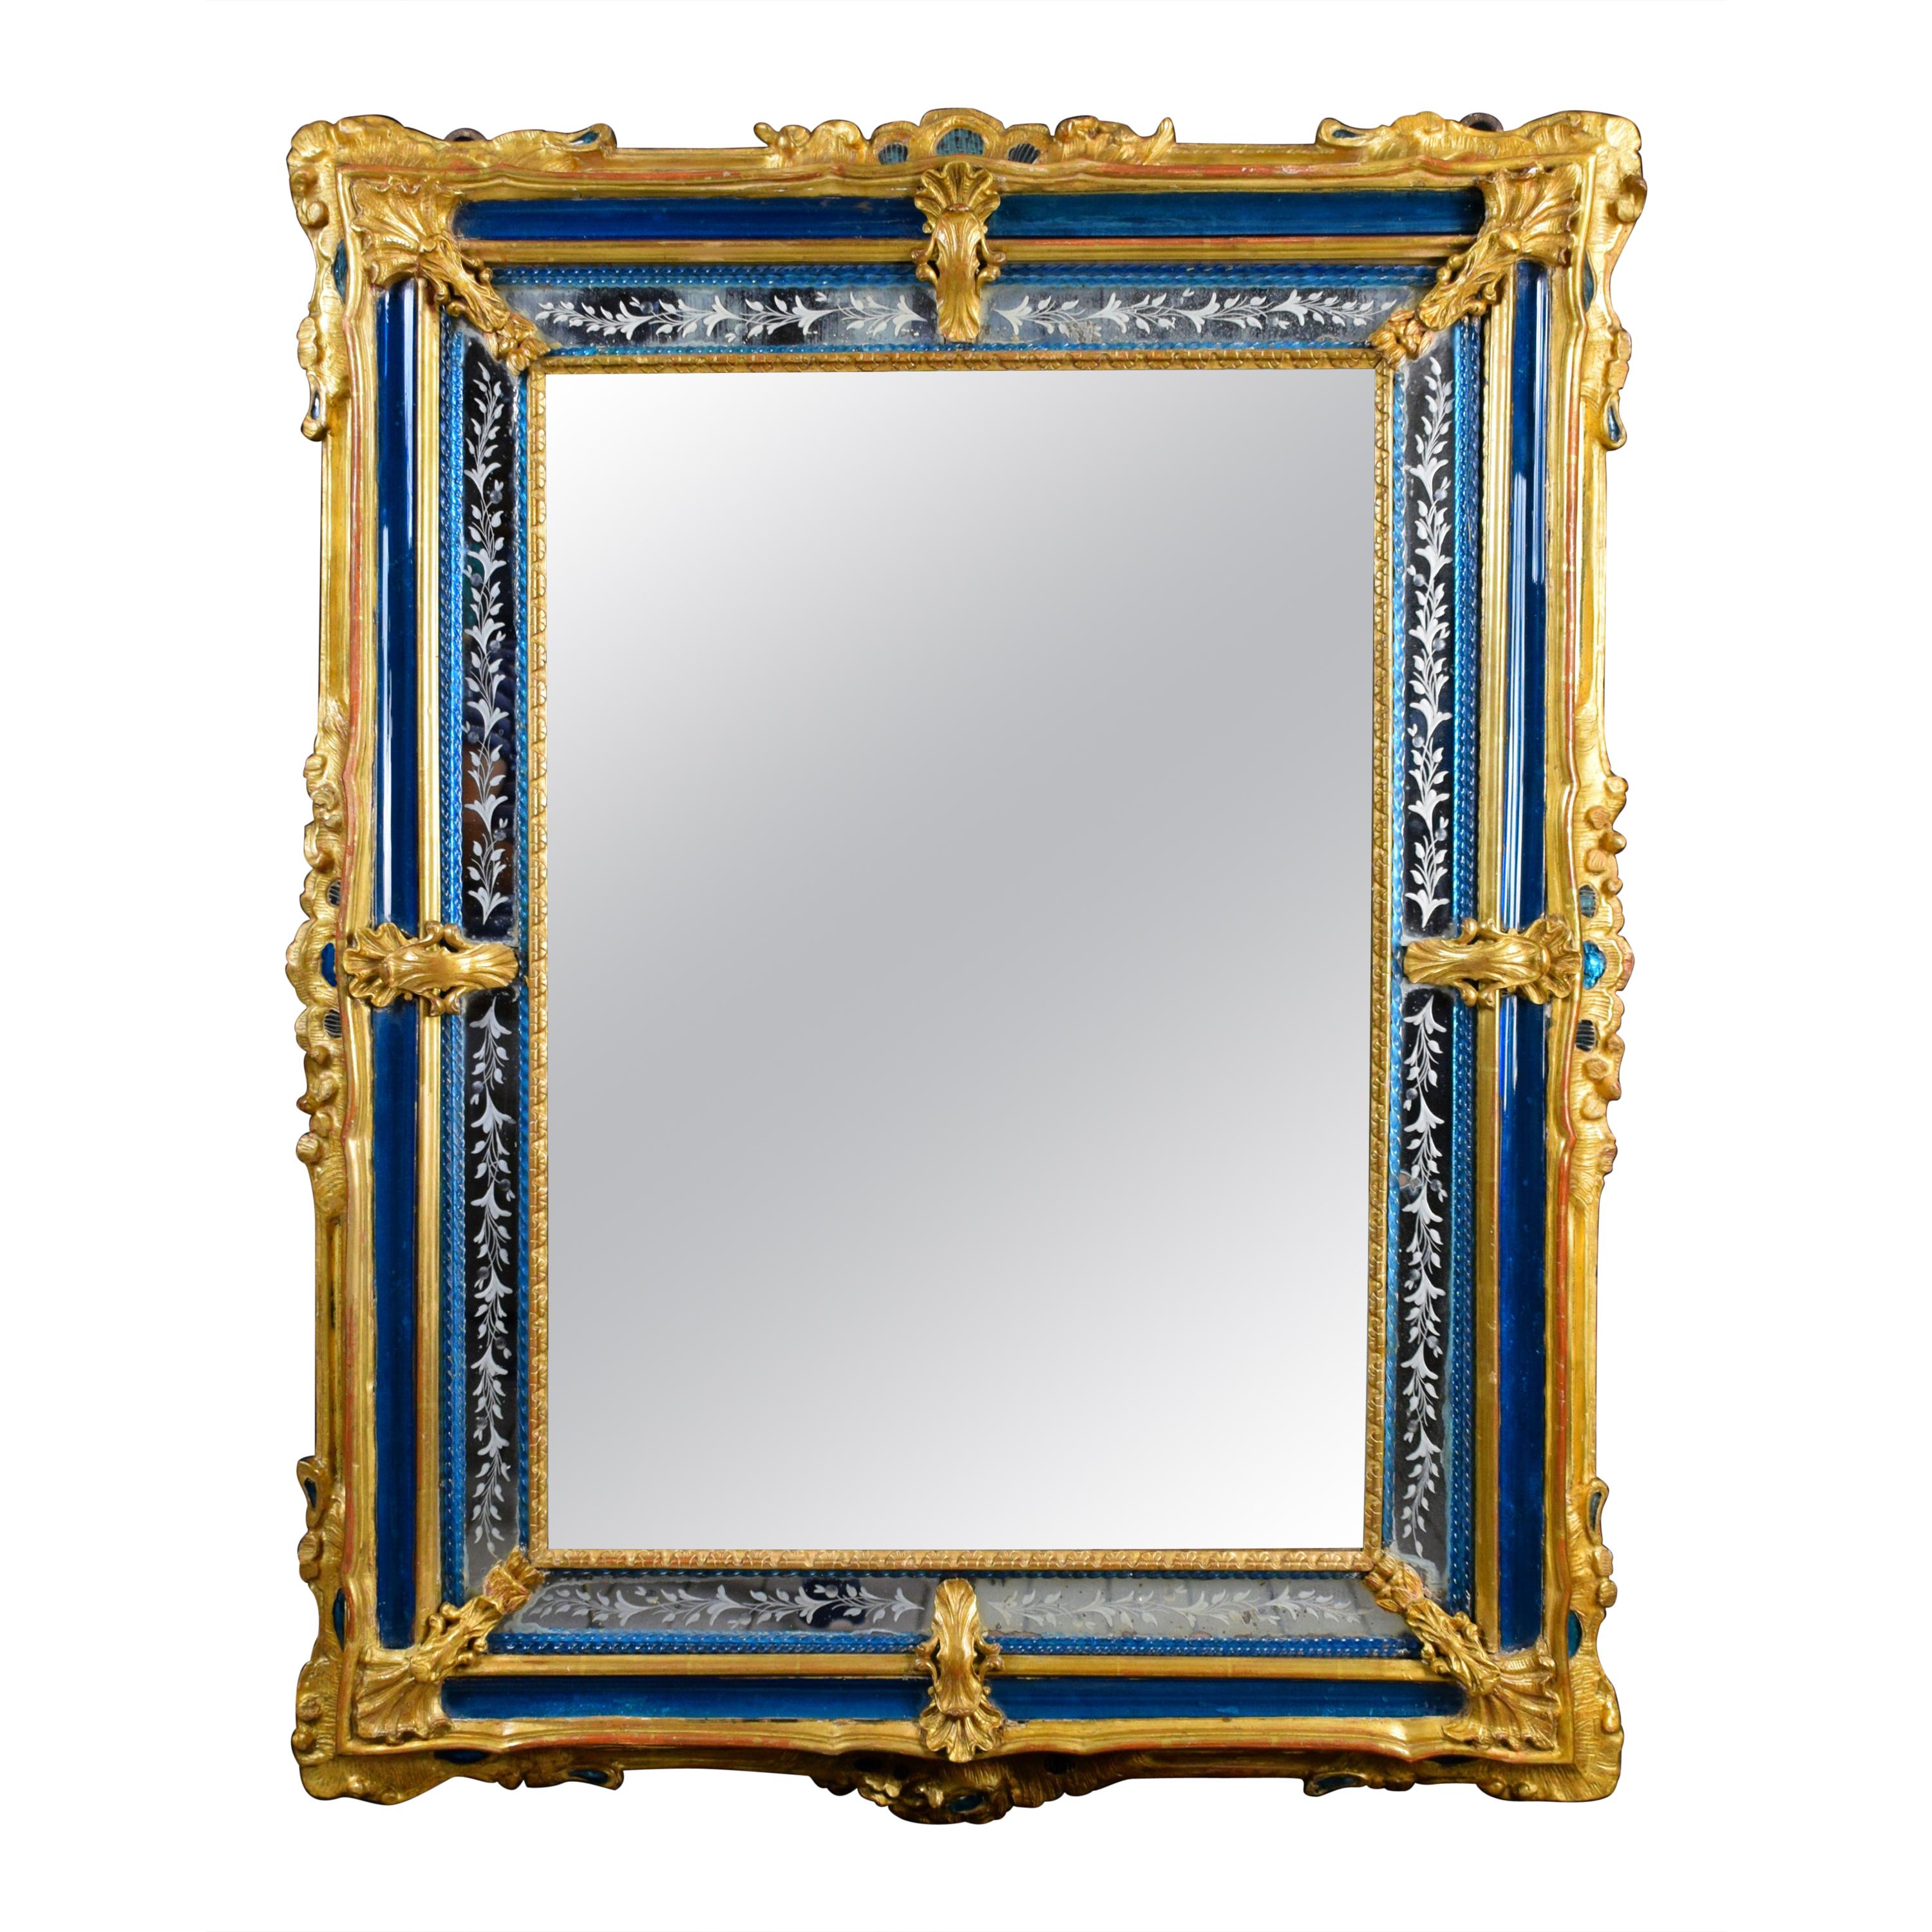 18th Century Rectangular Gilded Wood and Blue Glass Paste Venetian Wall Mirror